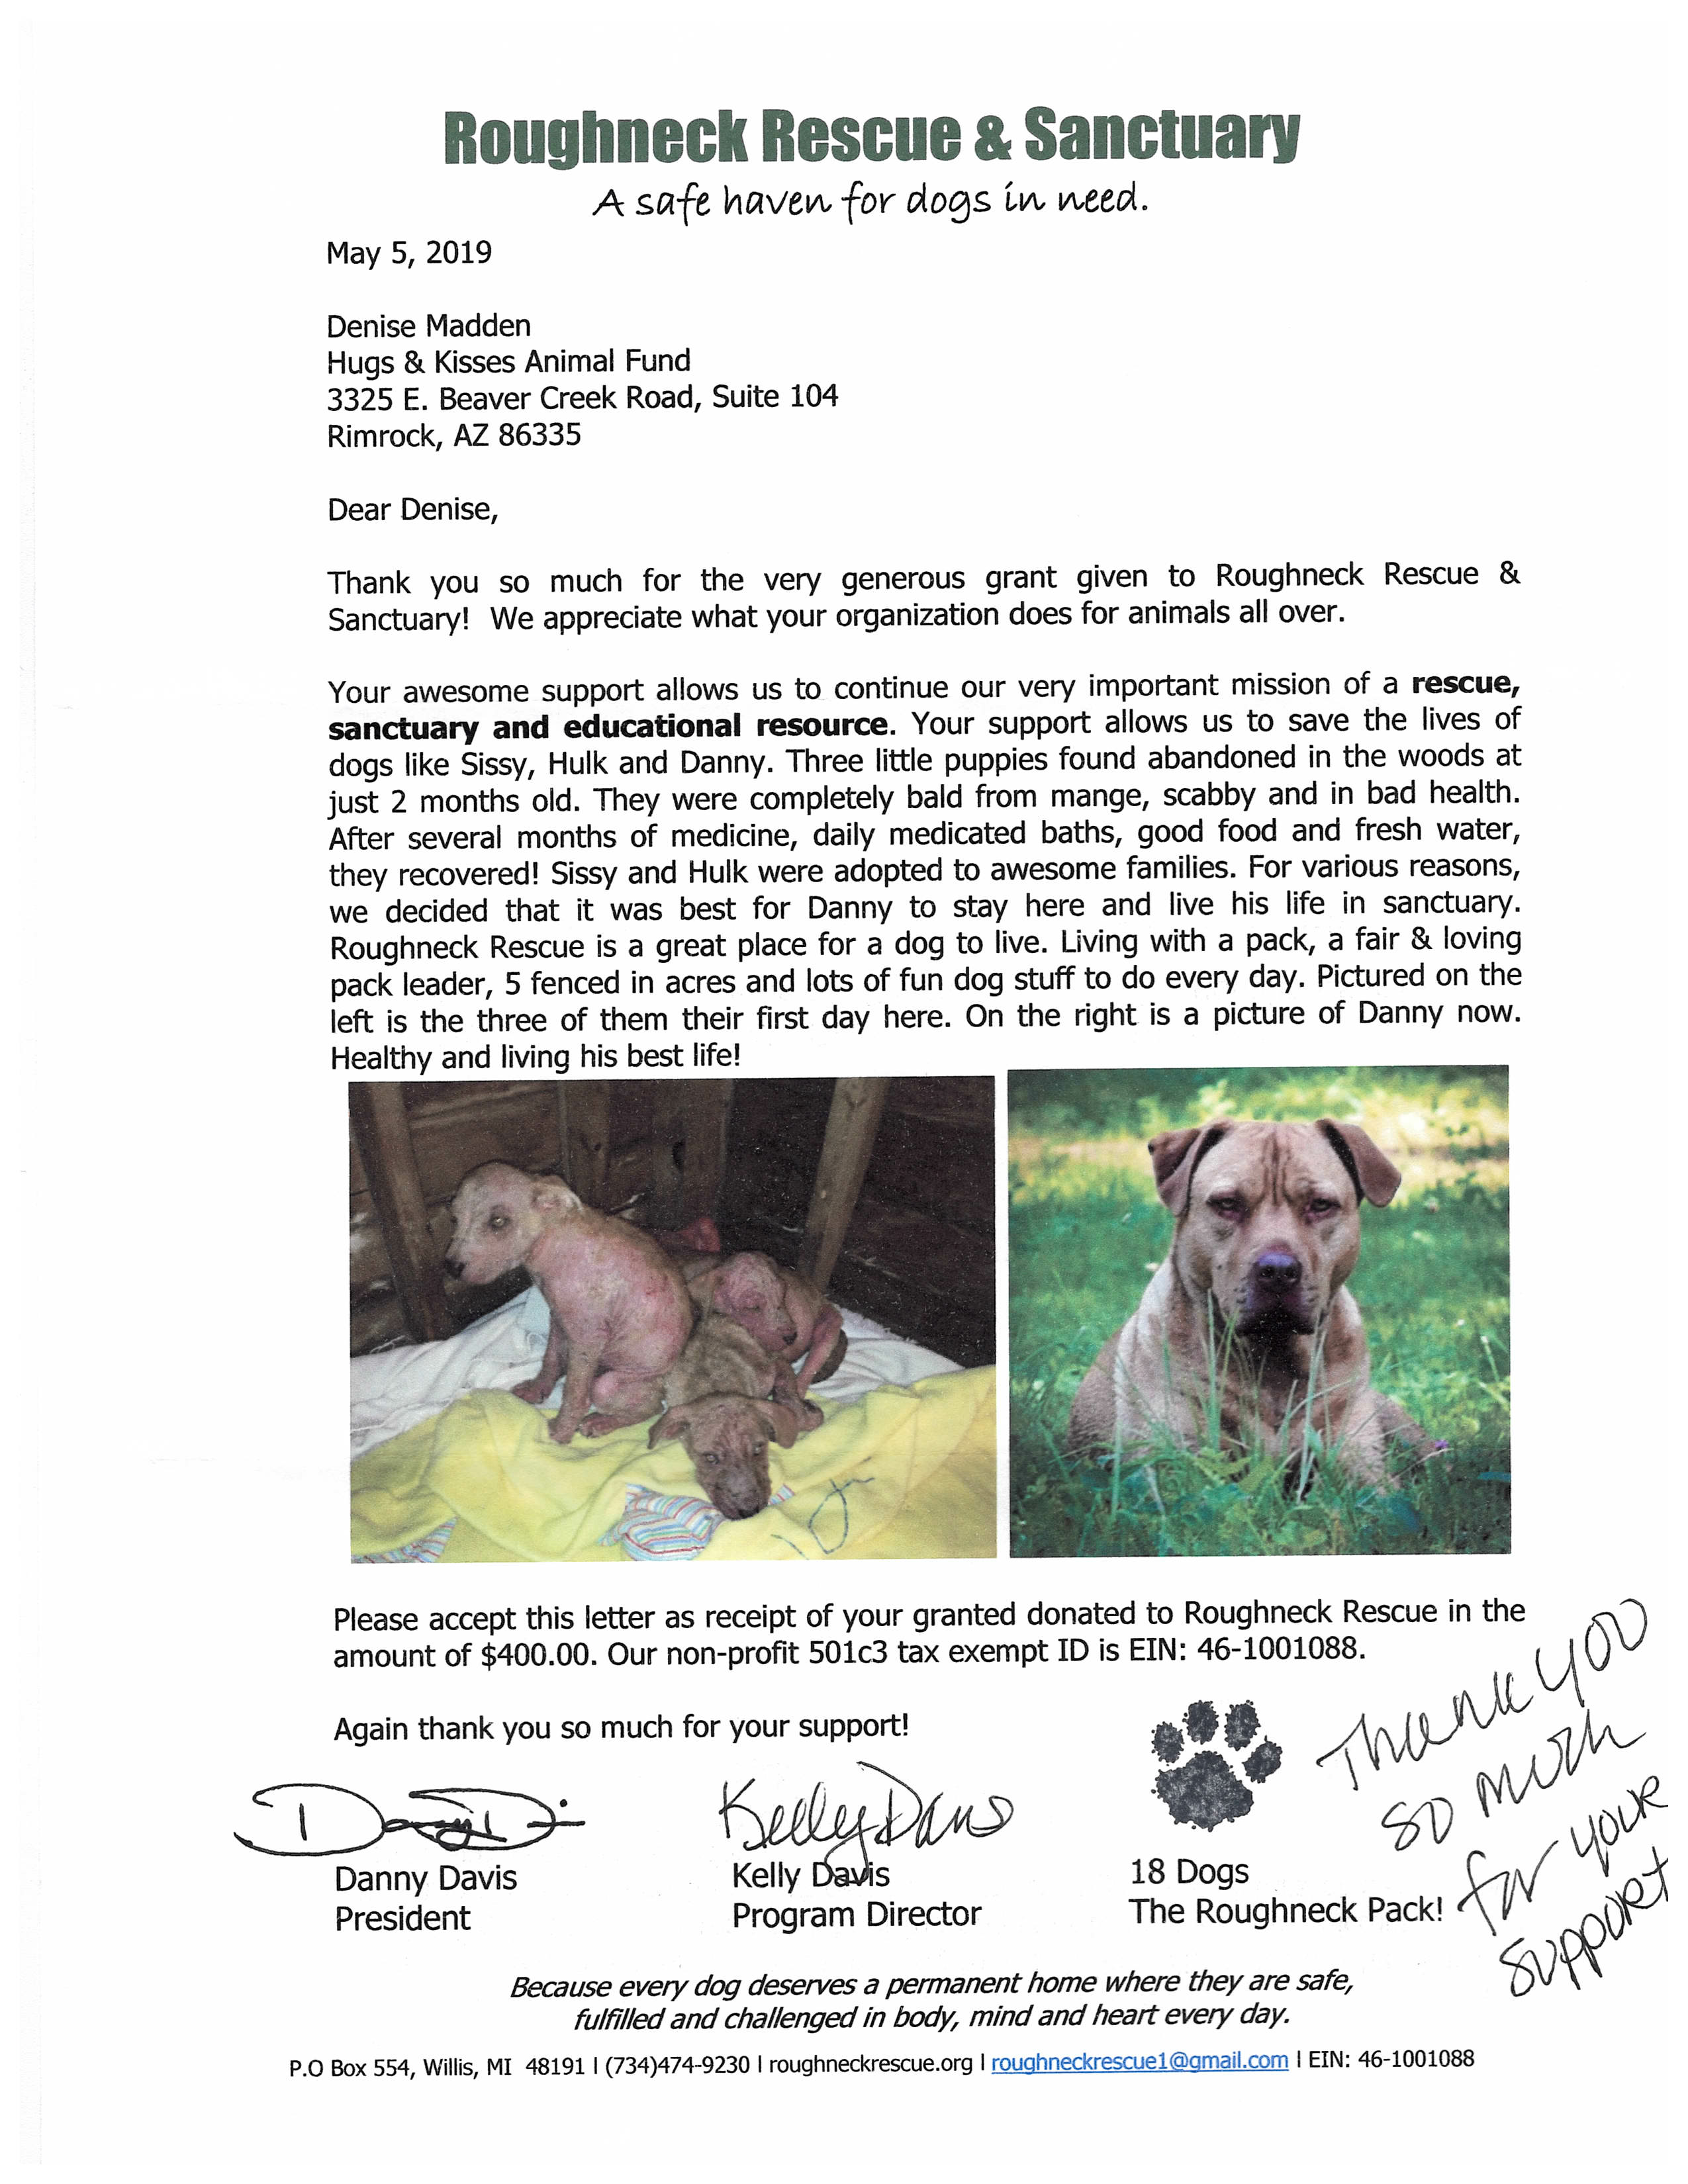 Thank you letter from Roughneck Rescue & Sanctuary